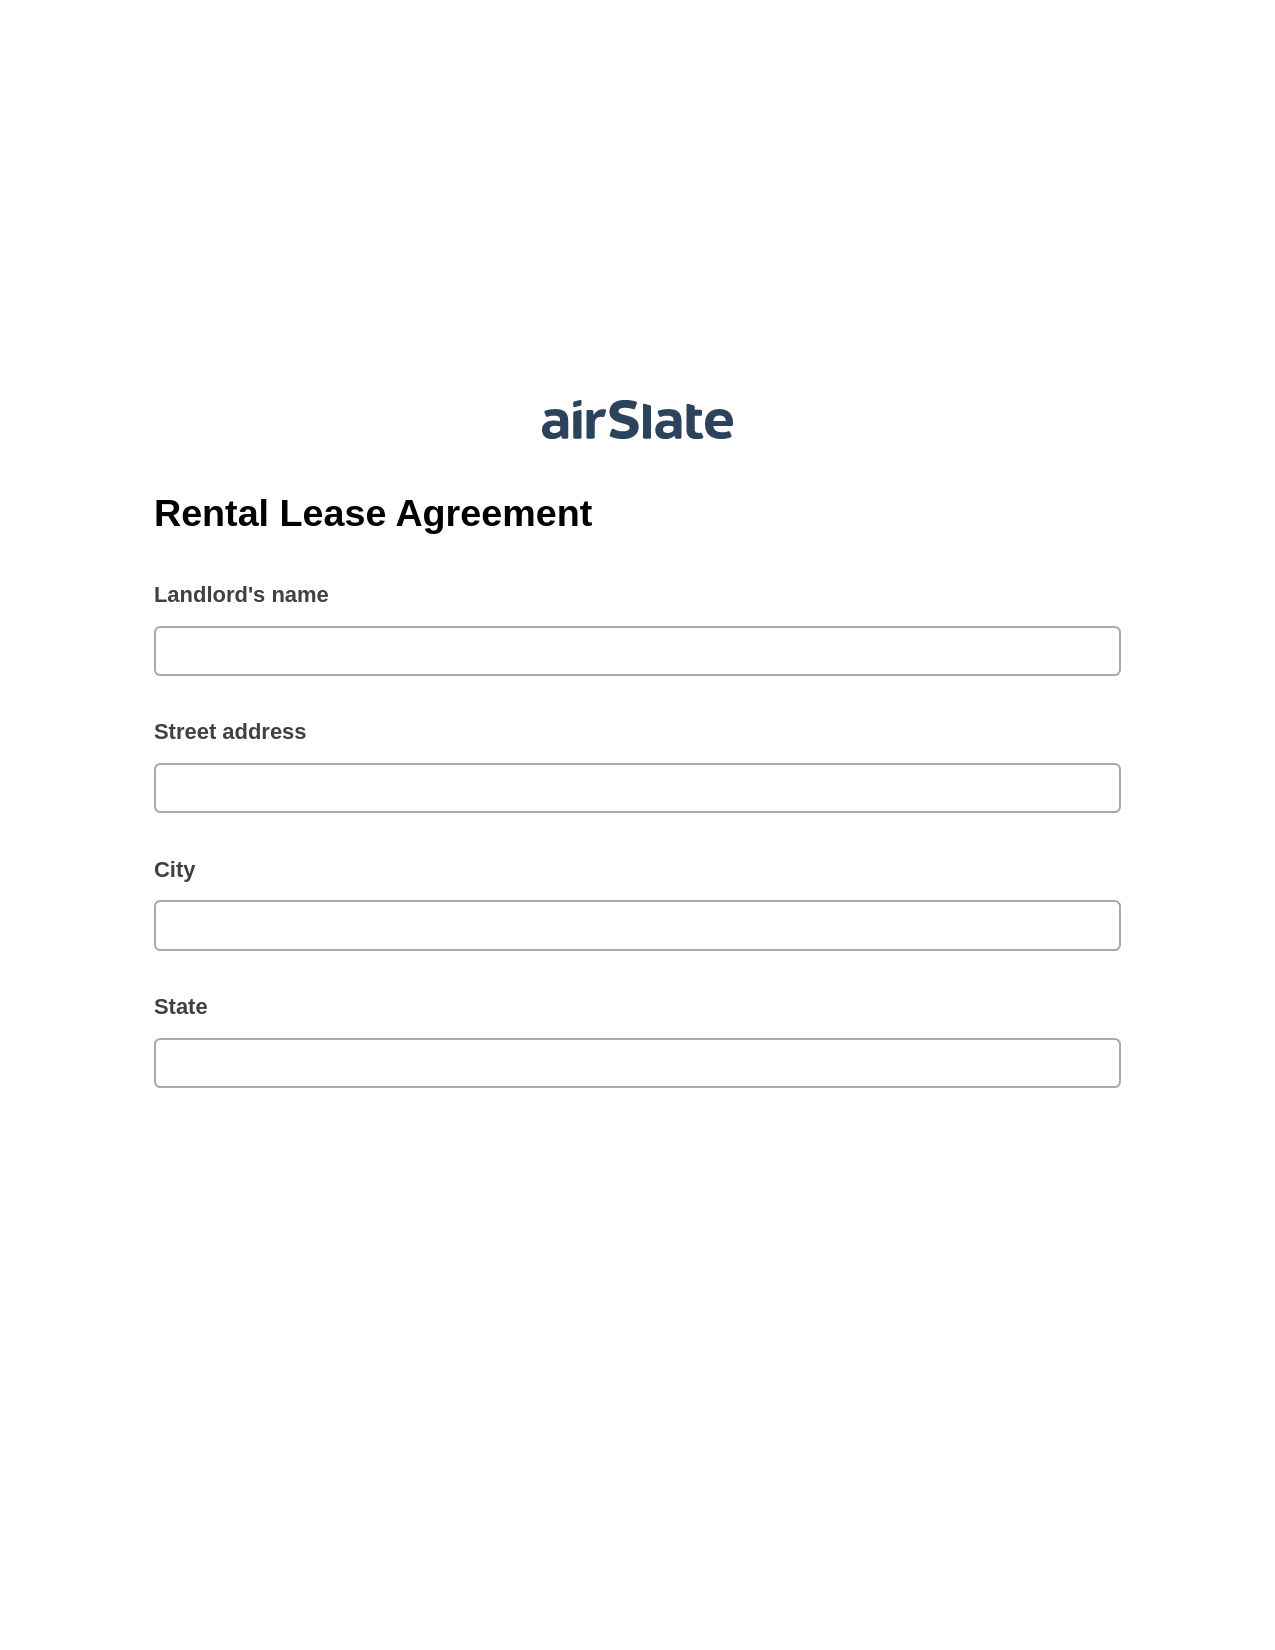 Rental Lease Agreement Pre-fill from Excel Spreadsheet Bot, Assign Roles to Recipients Bot, Webhook Postfinish Bot